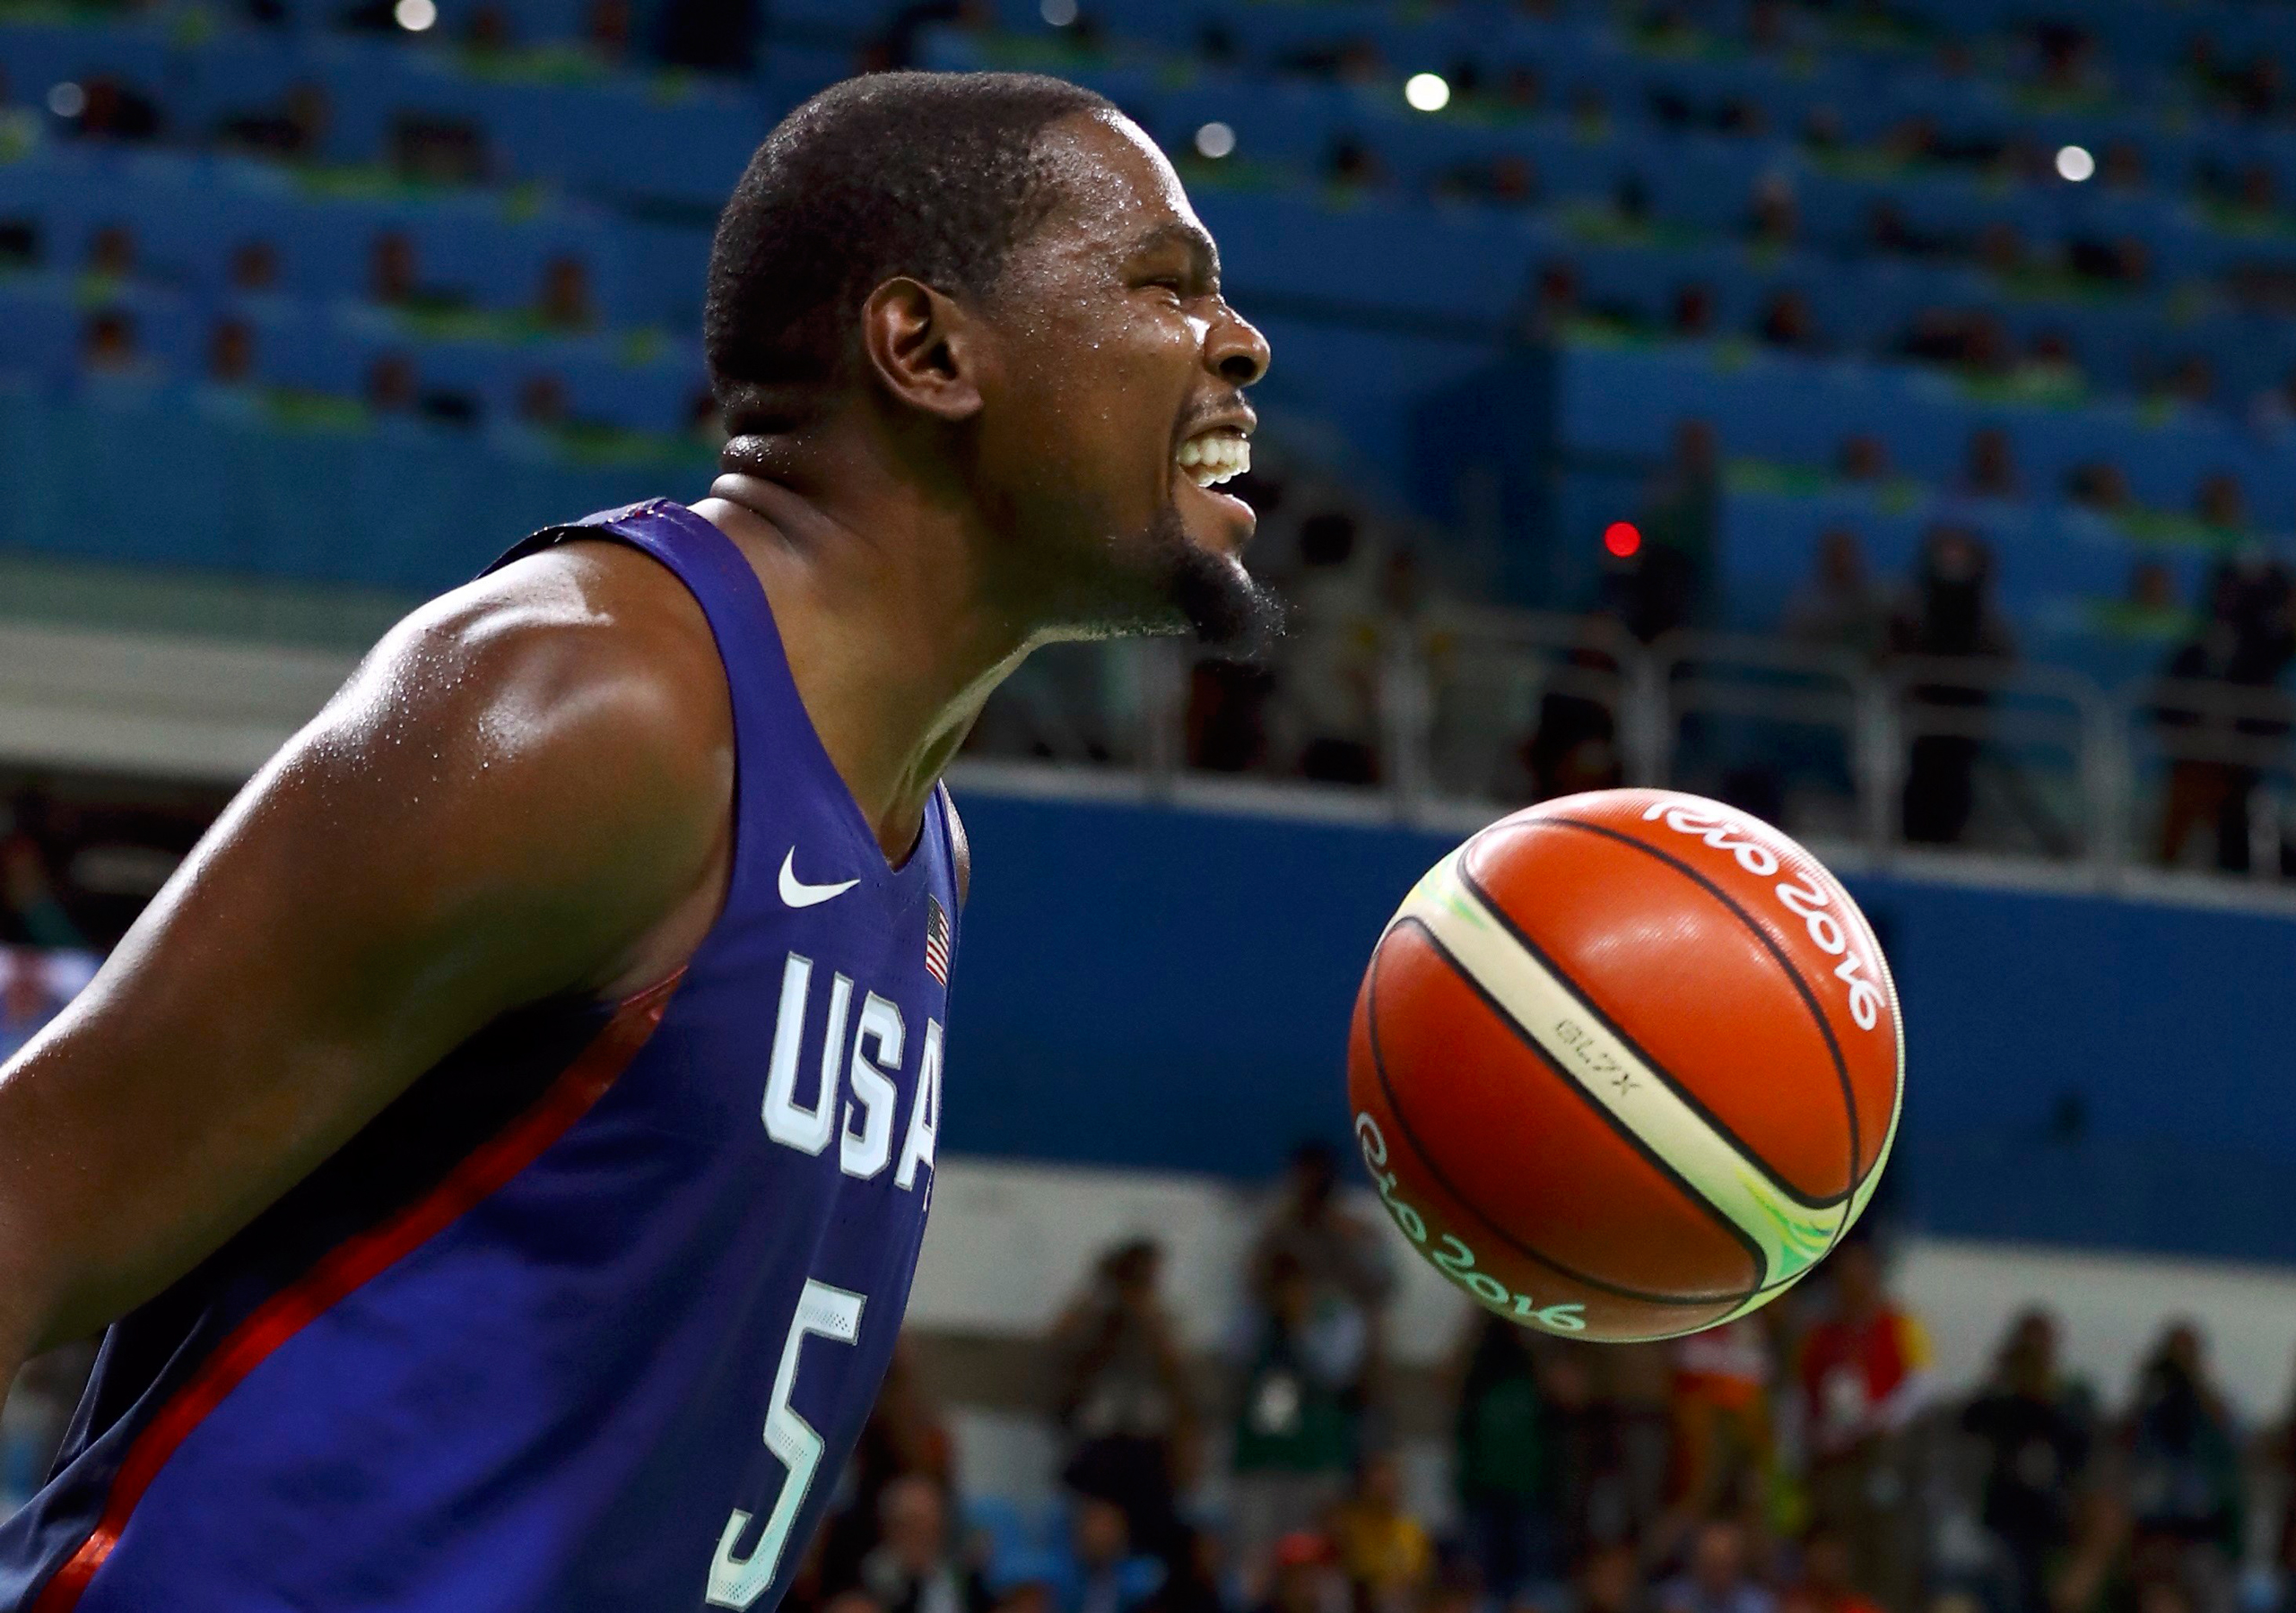 Kevin Durant of the USA reacts after a dunk in the Men's Gold Medal basketball game against Serbia at the 2016 Rio Olympics in Rio de Janeiro on Aug. 21, 2016. (Jim Young—Reuters)